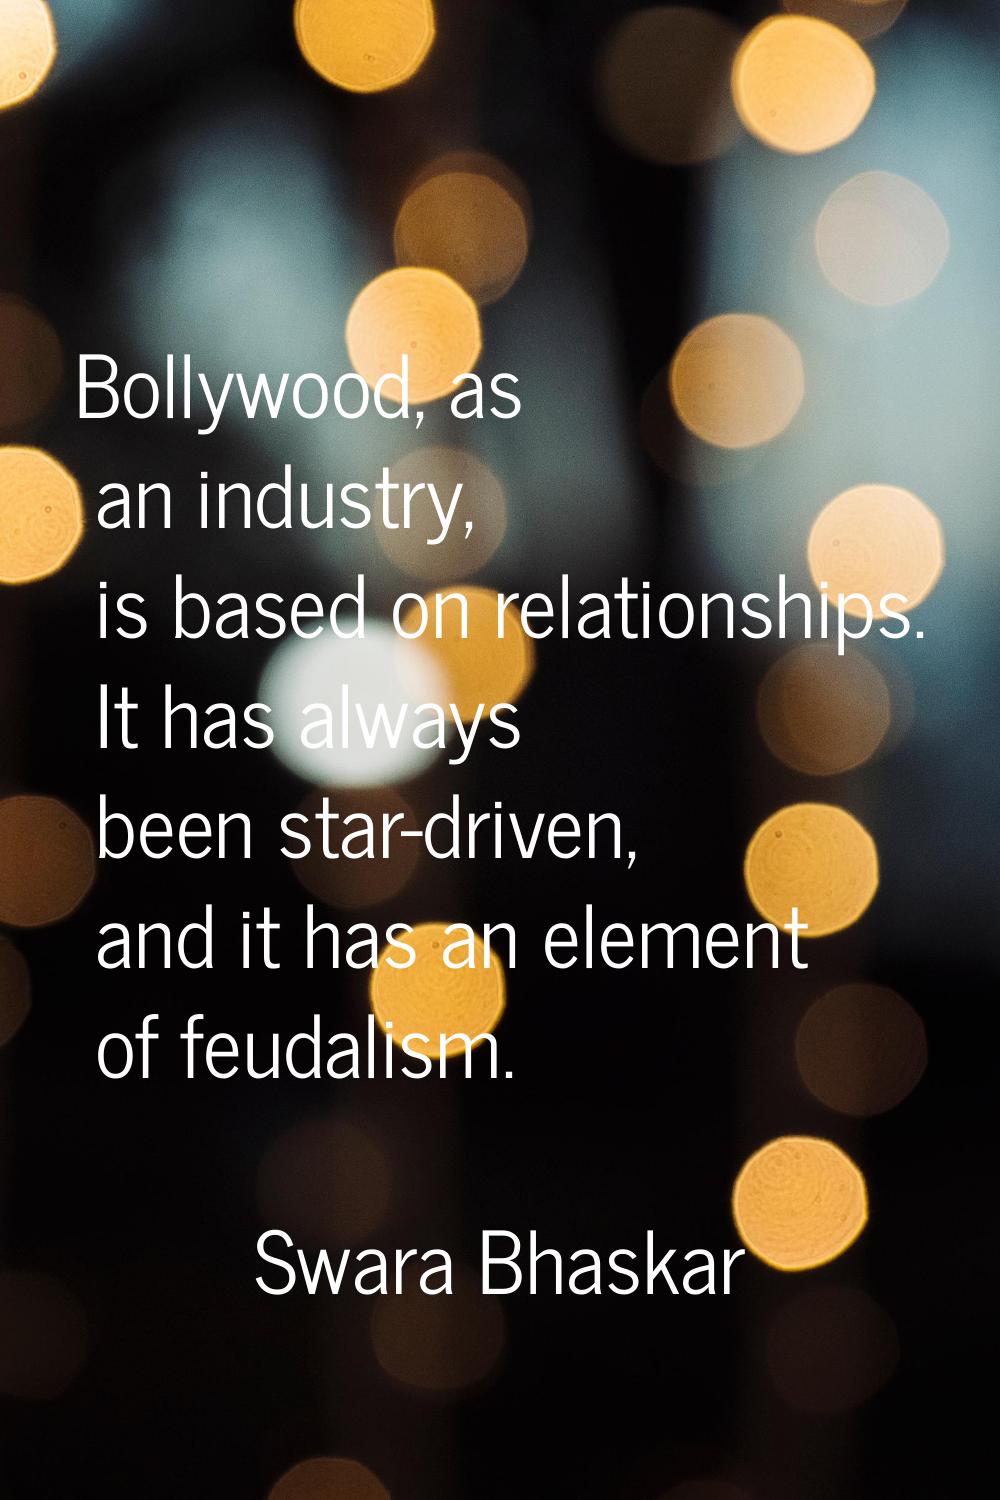 Bollywood, as an industry, is based on relationships. It has always been star-driven, and it has an